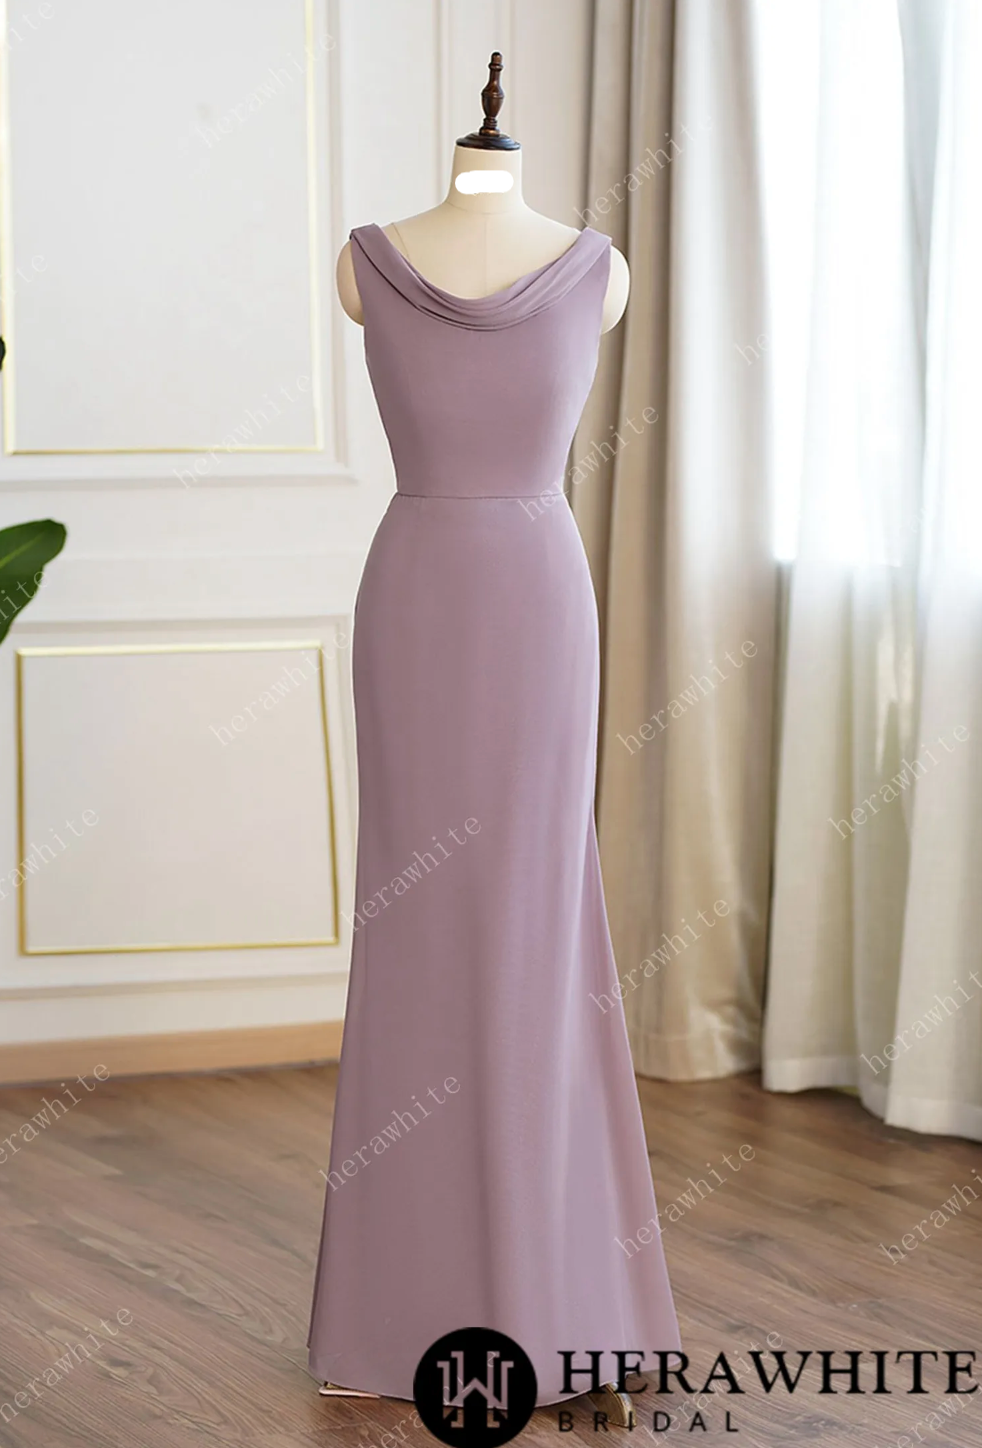 Top Ten Wedding Colors For Summer Bridesmaid Dresses 2016 - Tulle &  Chantilly Wedding Blog | Lavender bridesmaid dresses, Summer bridesmaid  dresses, Summer wedding colors